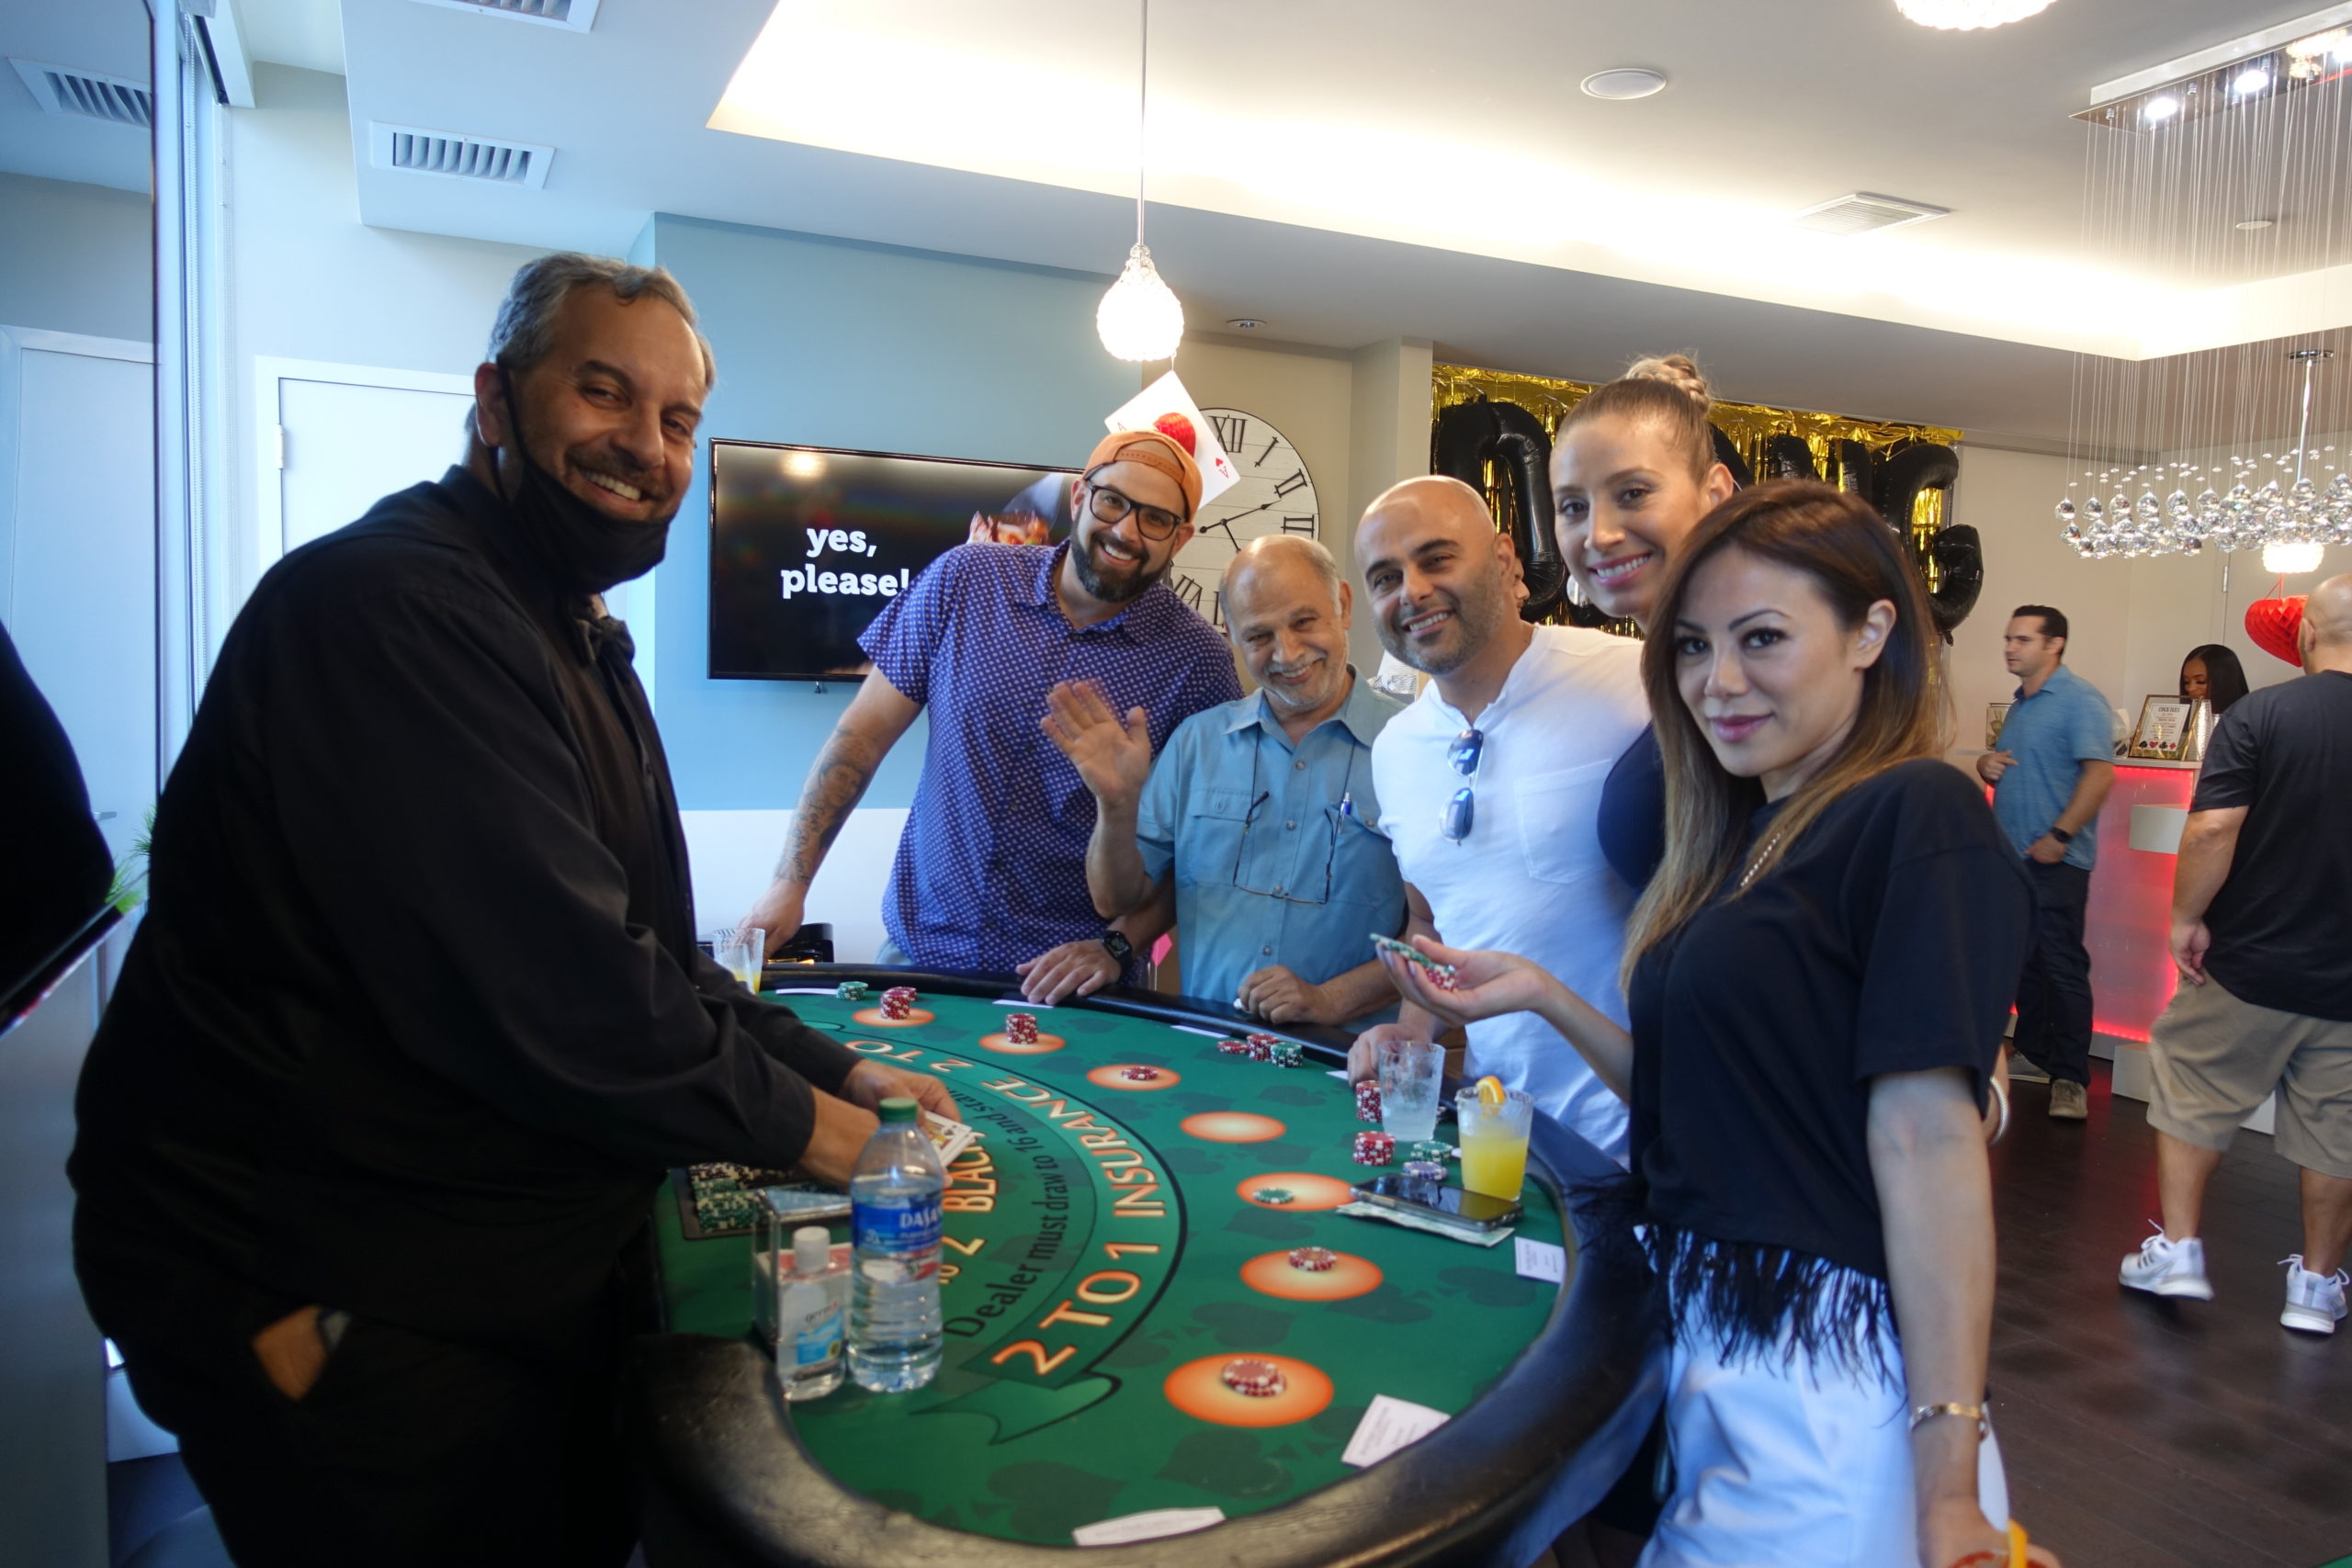 A full blackjack table at a casino-themed event